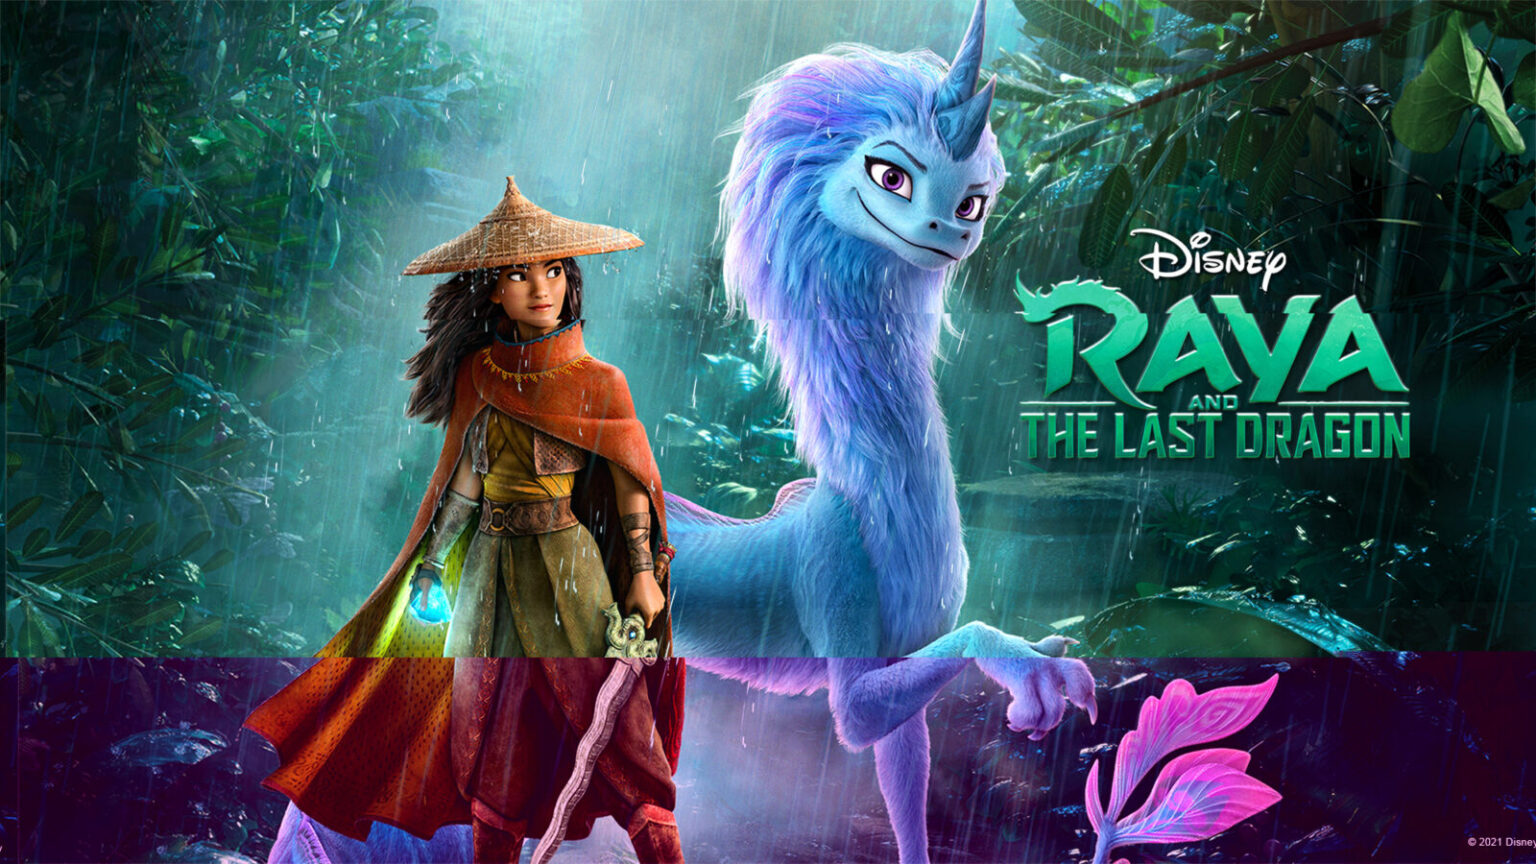 Disney's new Raya and the Last Dragon to stream on OSN straight from